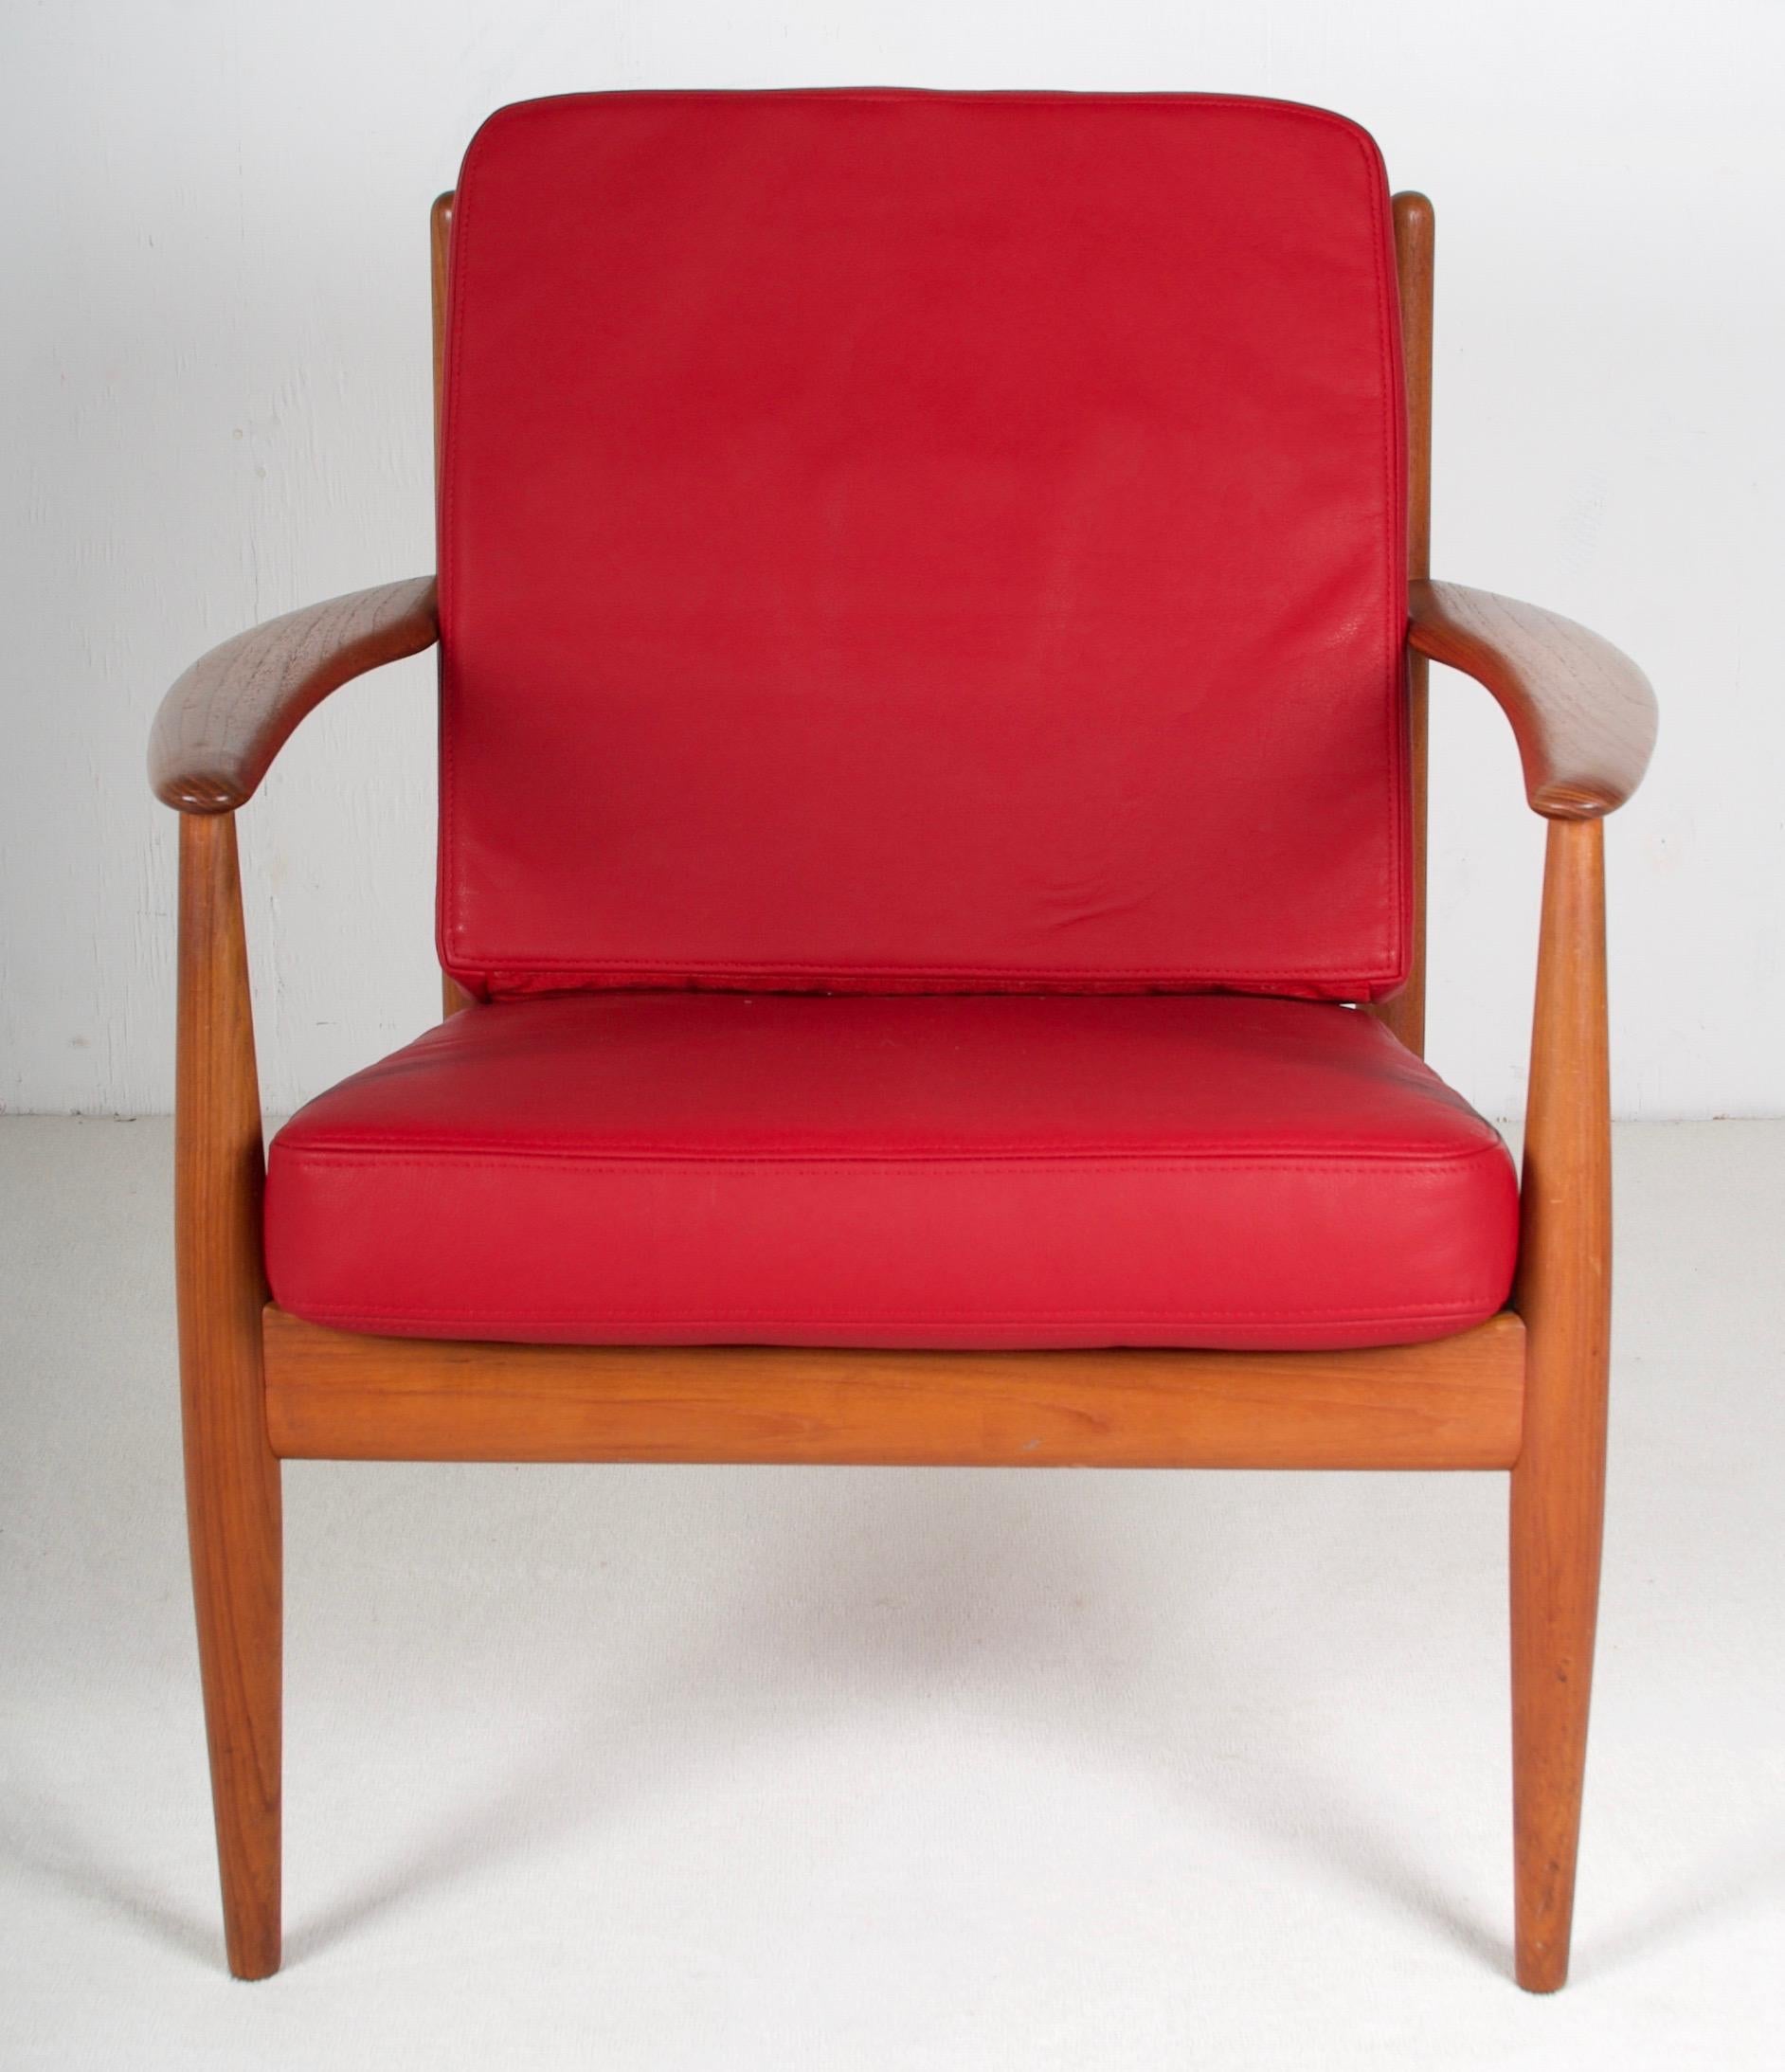 A perfectly restored lounge chair from the 1950s. New foam, fine very soft leather with top stitching. Detail photos show the excellent condition of this chair.

 